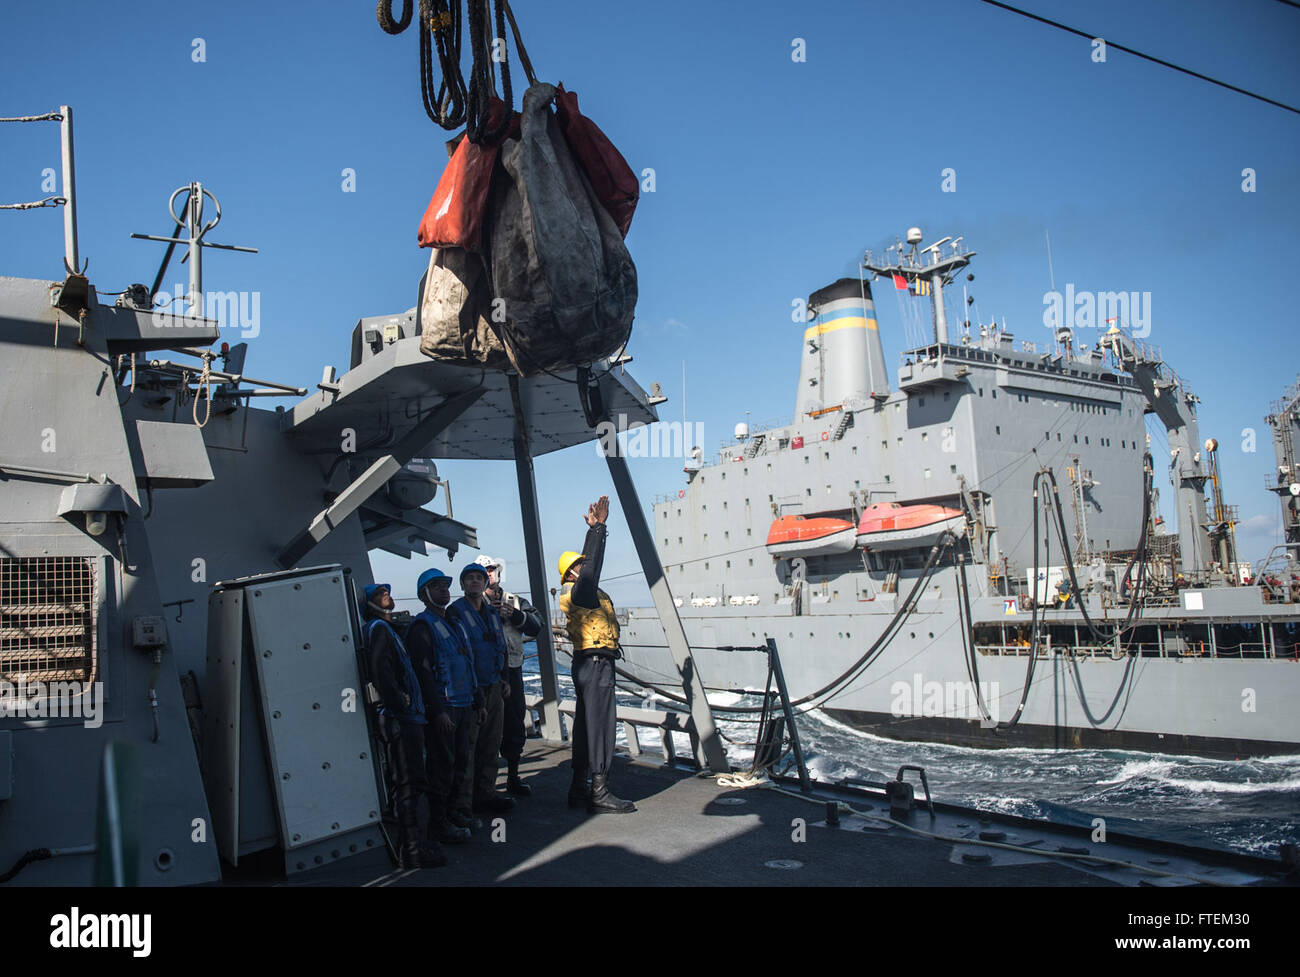 MEDITERRANEAN SEA (Feb. 20, 2015) Sailors aboard USS Donald Cook (DDG 75) participate in a replenishment-at-sea. Donald Cook, an Arleigh Burke-class guided-missile destroyer forward-deployed to Rota, Spain, is conducting naval operations in the U.S. 6th Fleet area of operations in support of U.S. national security interests in Europe. Stock Photo